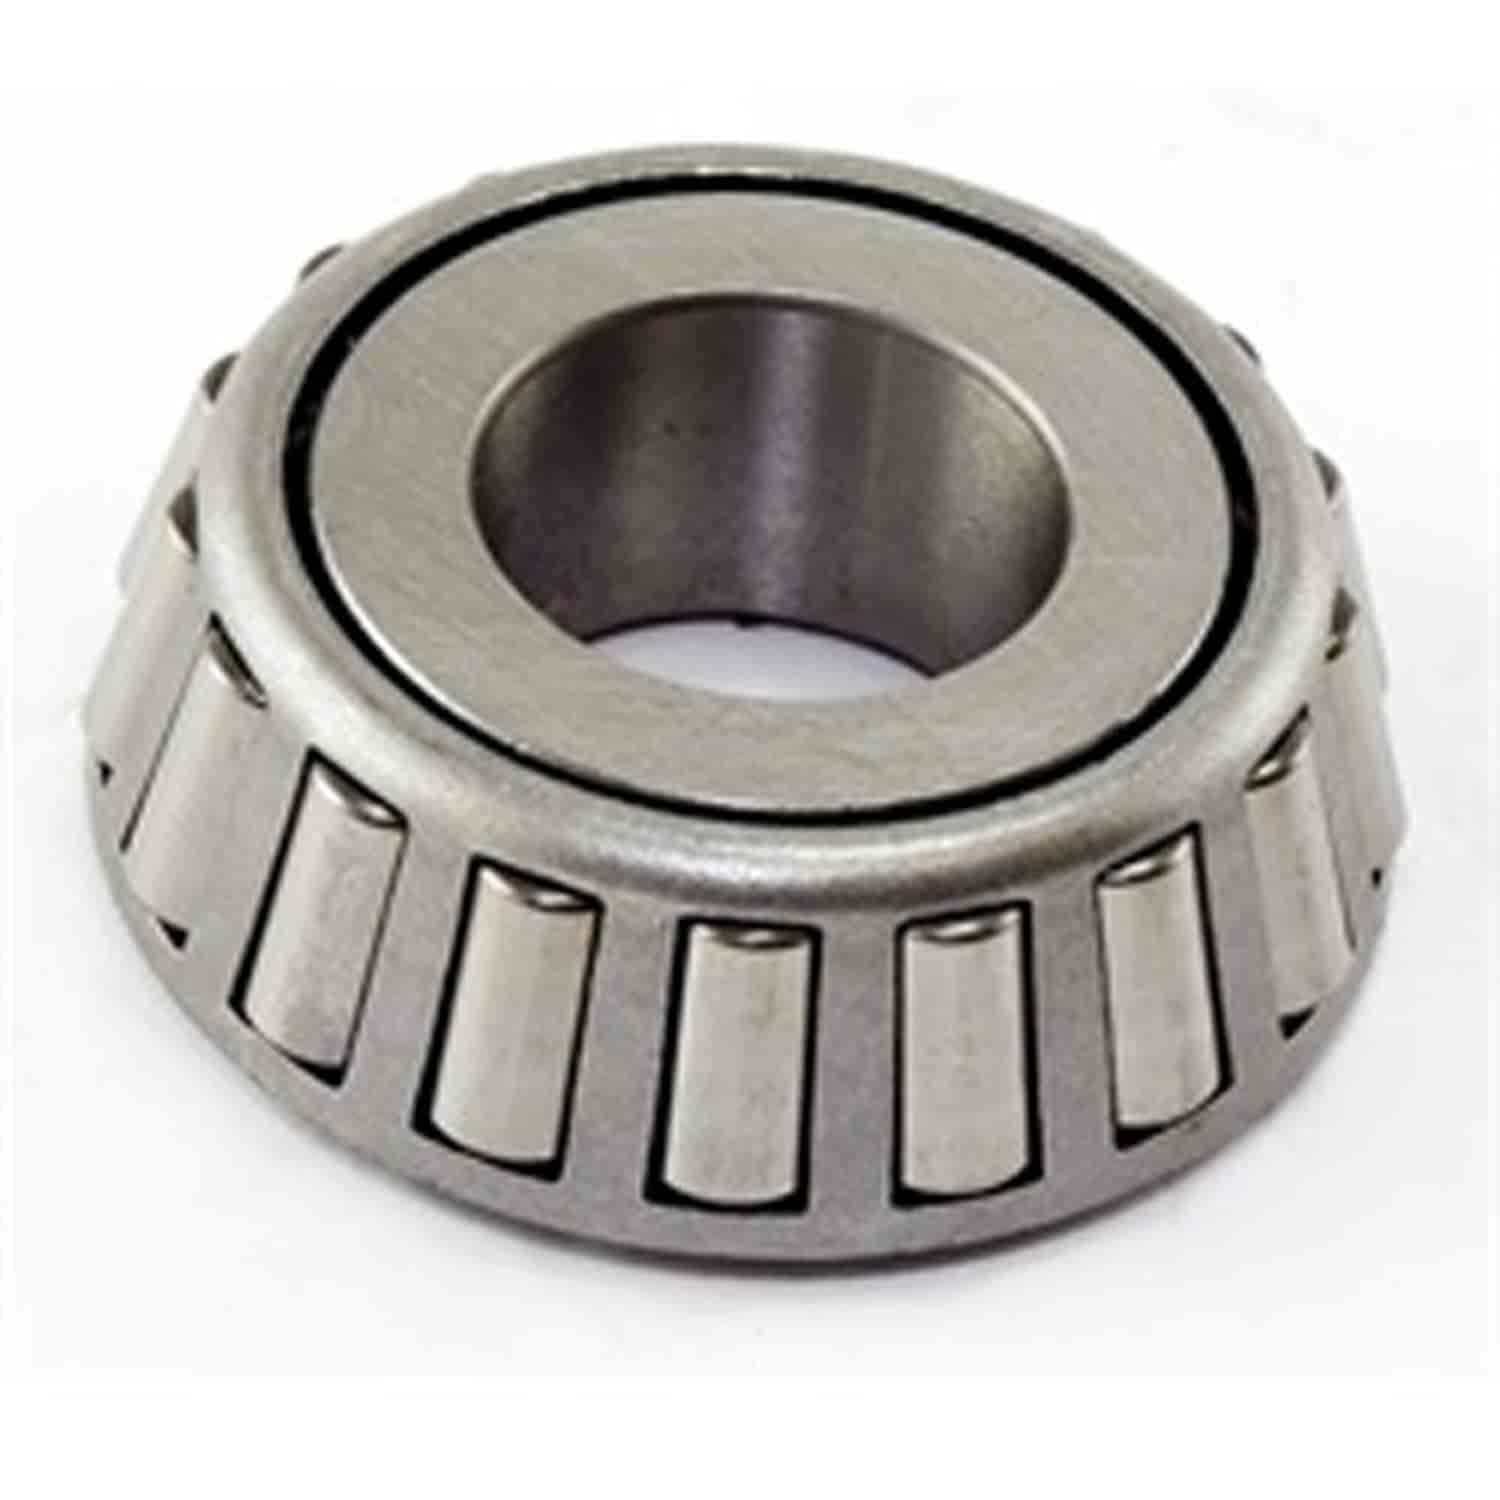 Outer Pinion Bearing Cup Jeep CJ3A 1948-1953 M38 1948-1953 Full Size Cherokee SJ 1974-1991